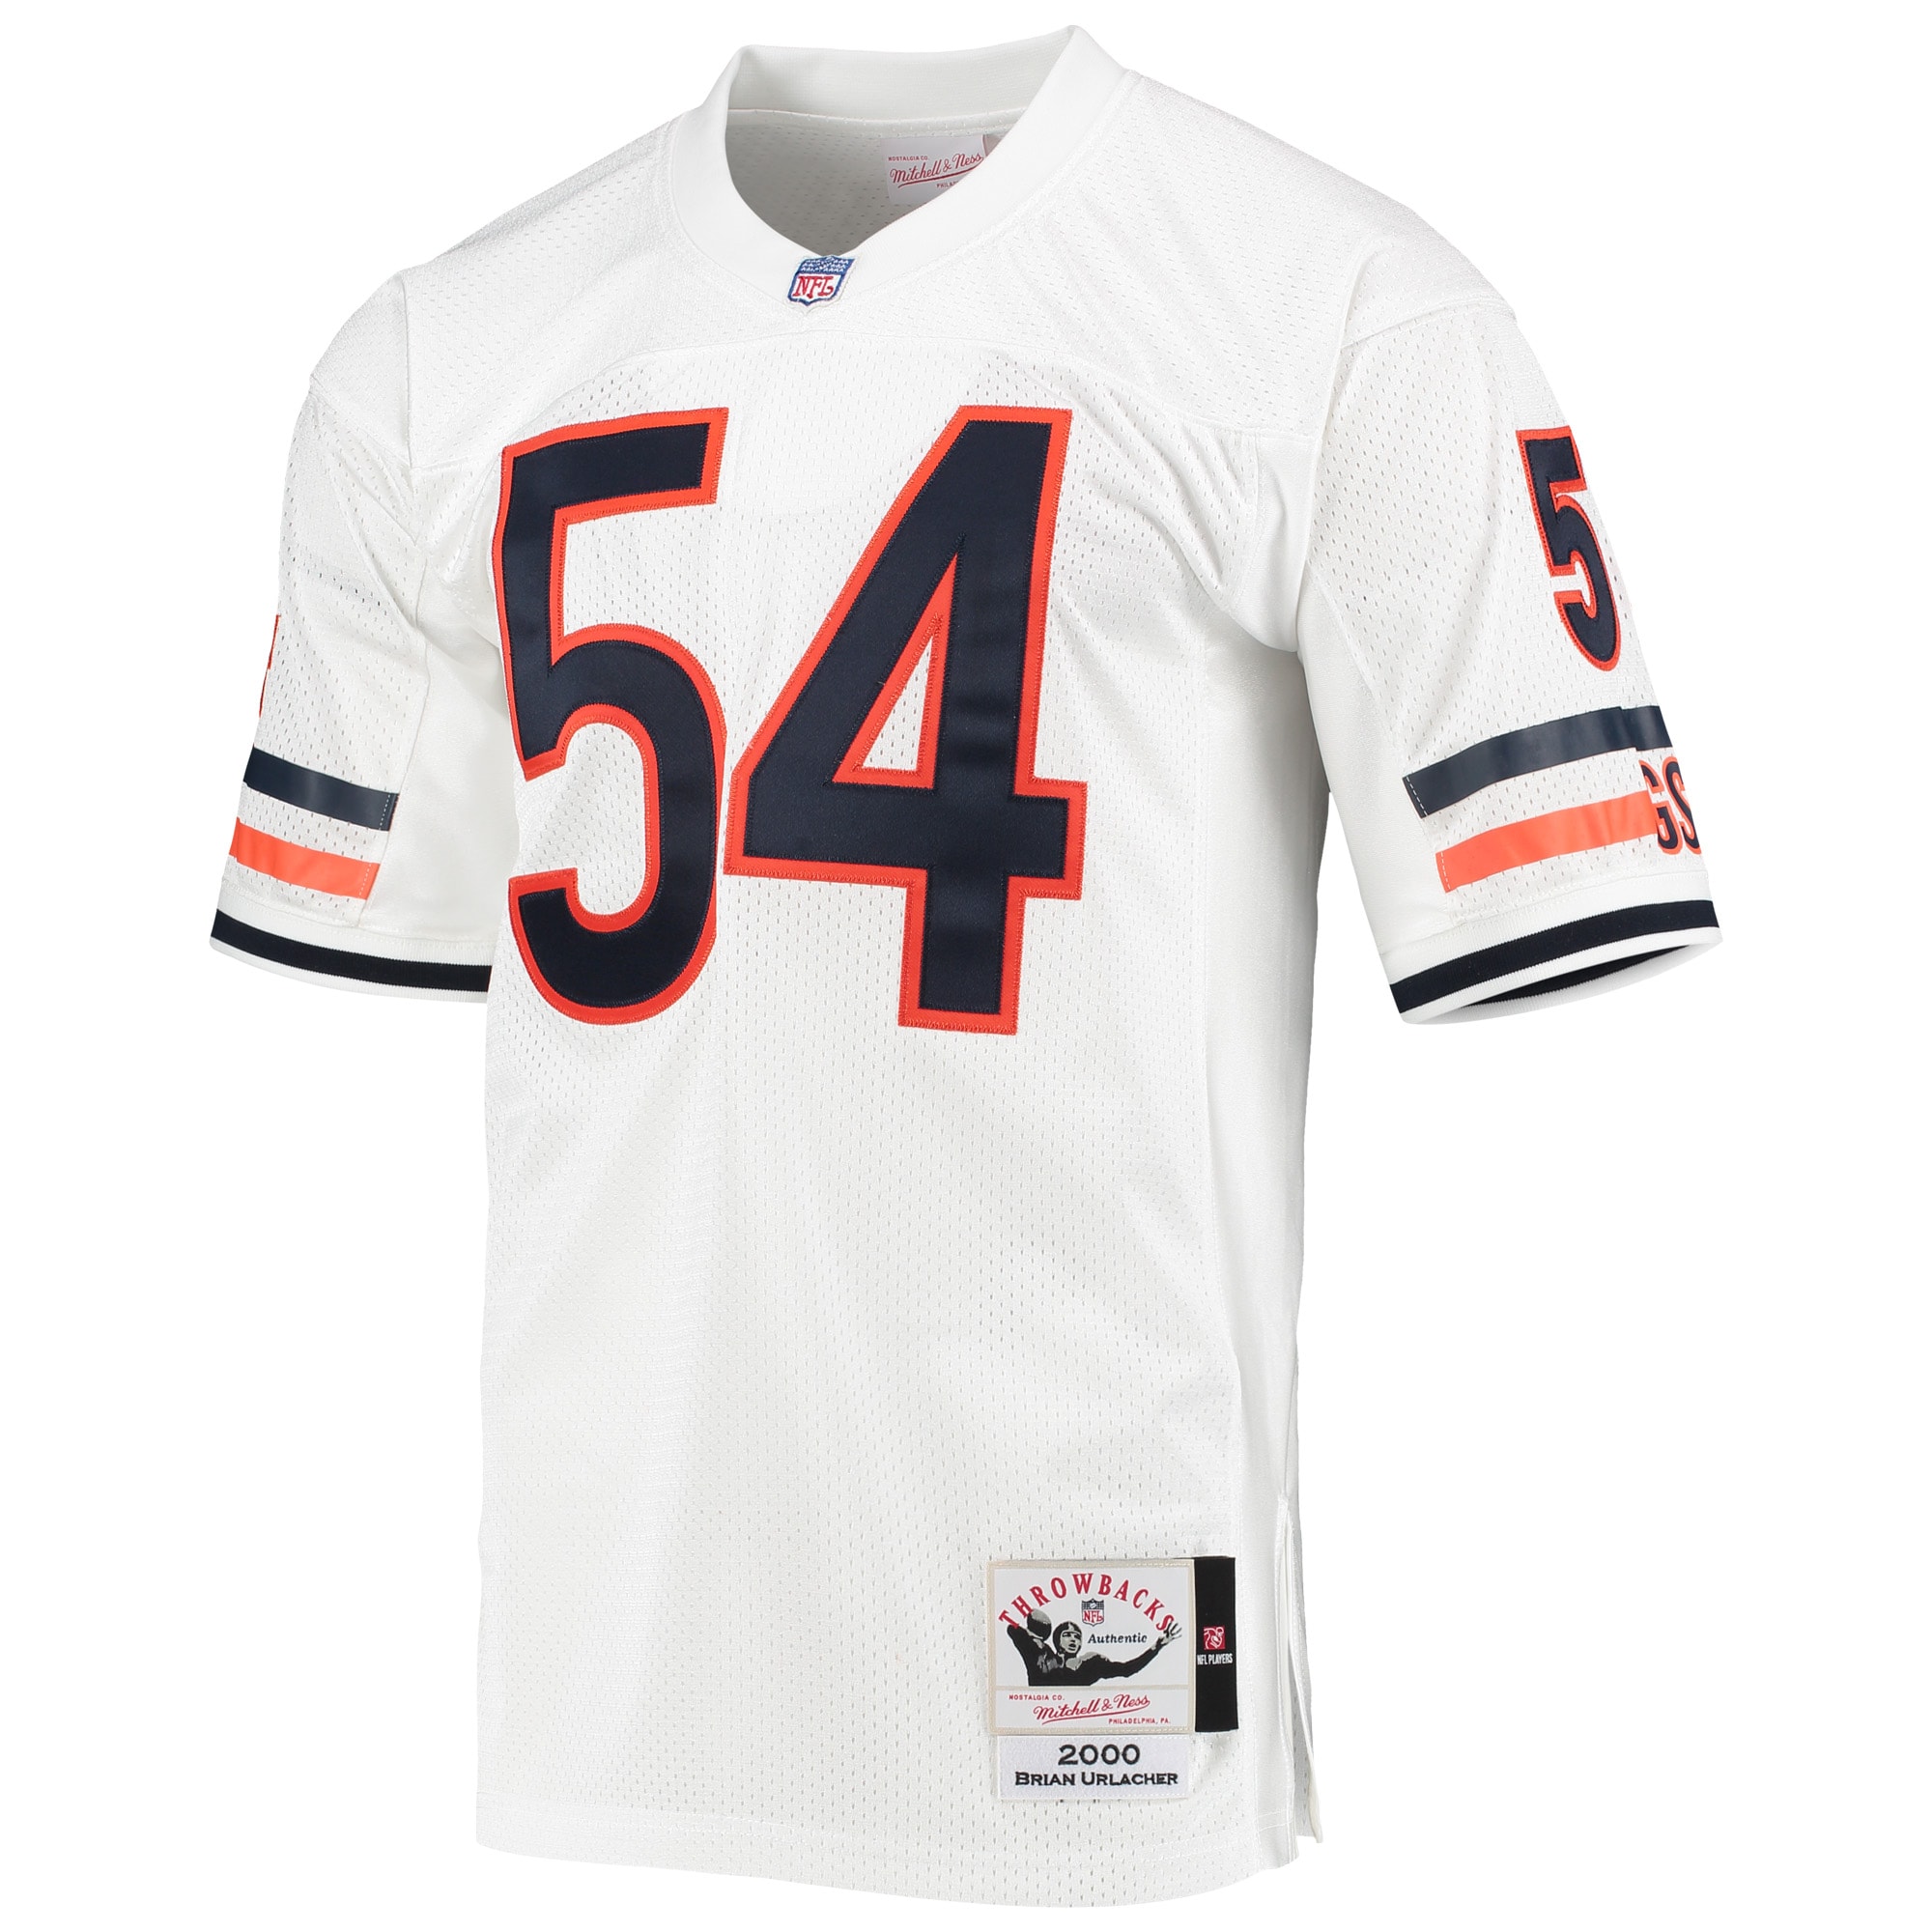 Men's Chicago Bears Jerseys White Brian Urlacher 2000 Authentic Throwback Retired Player Style